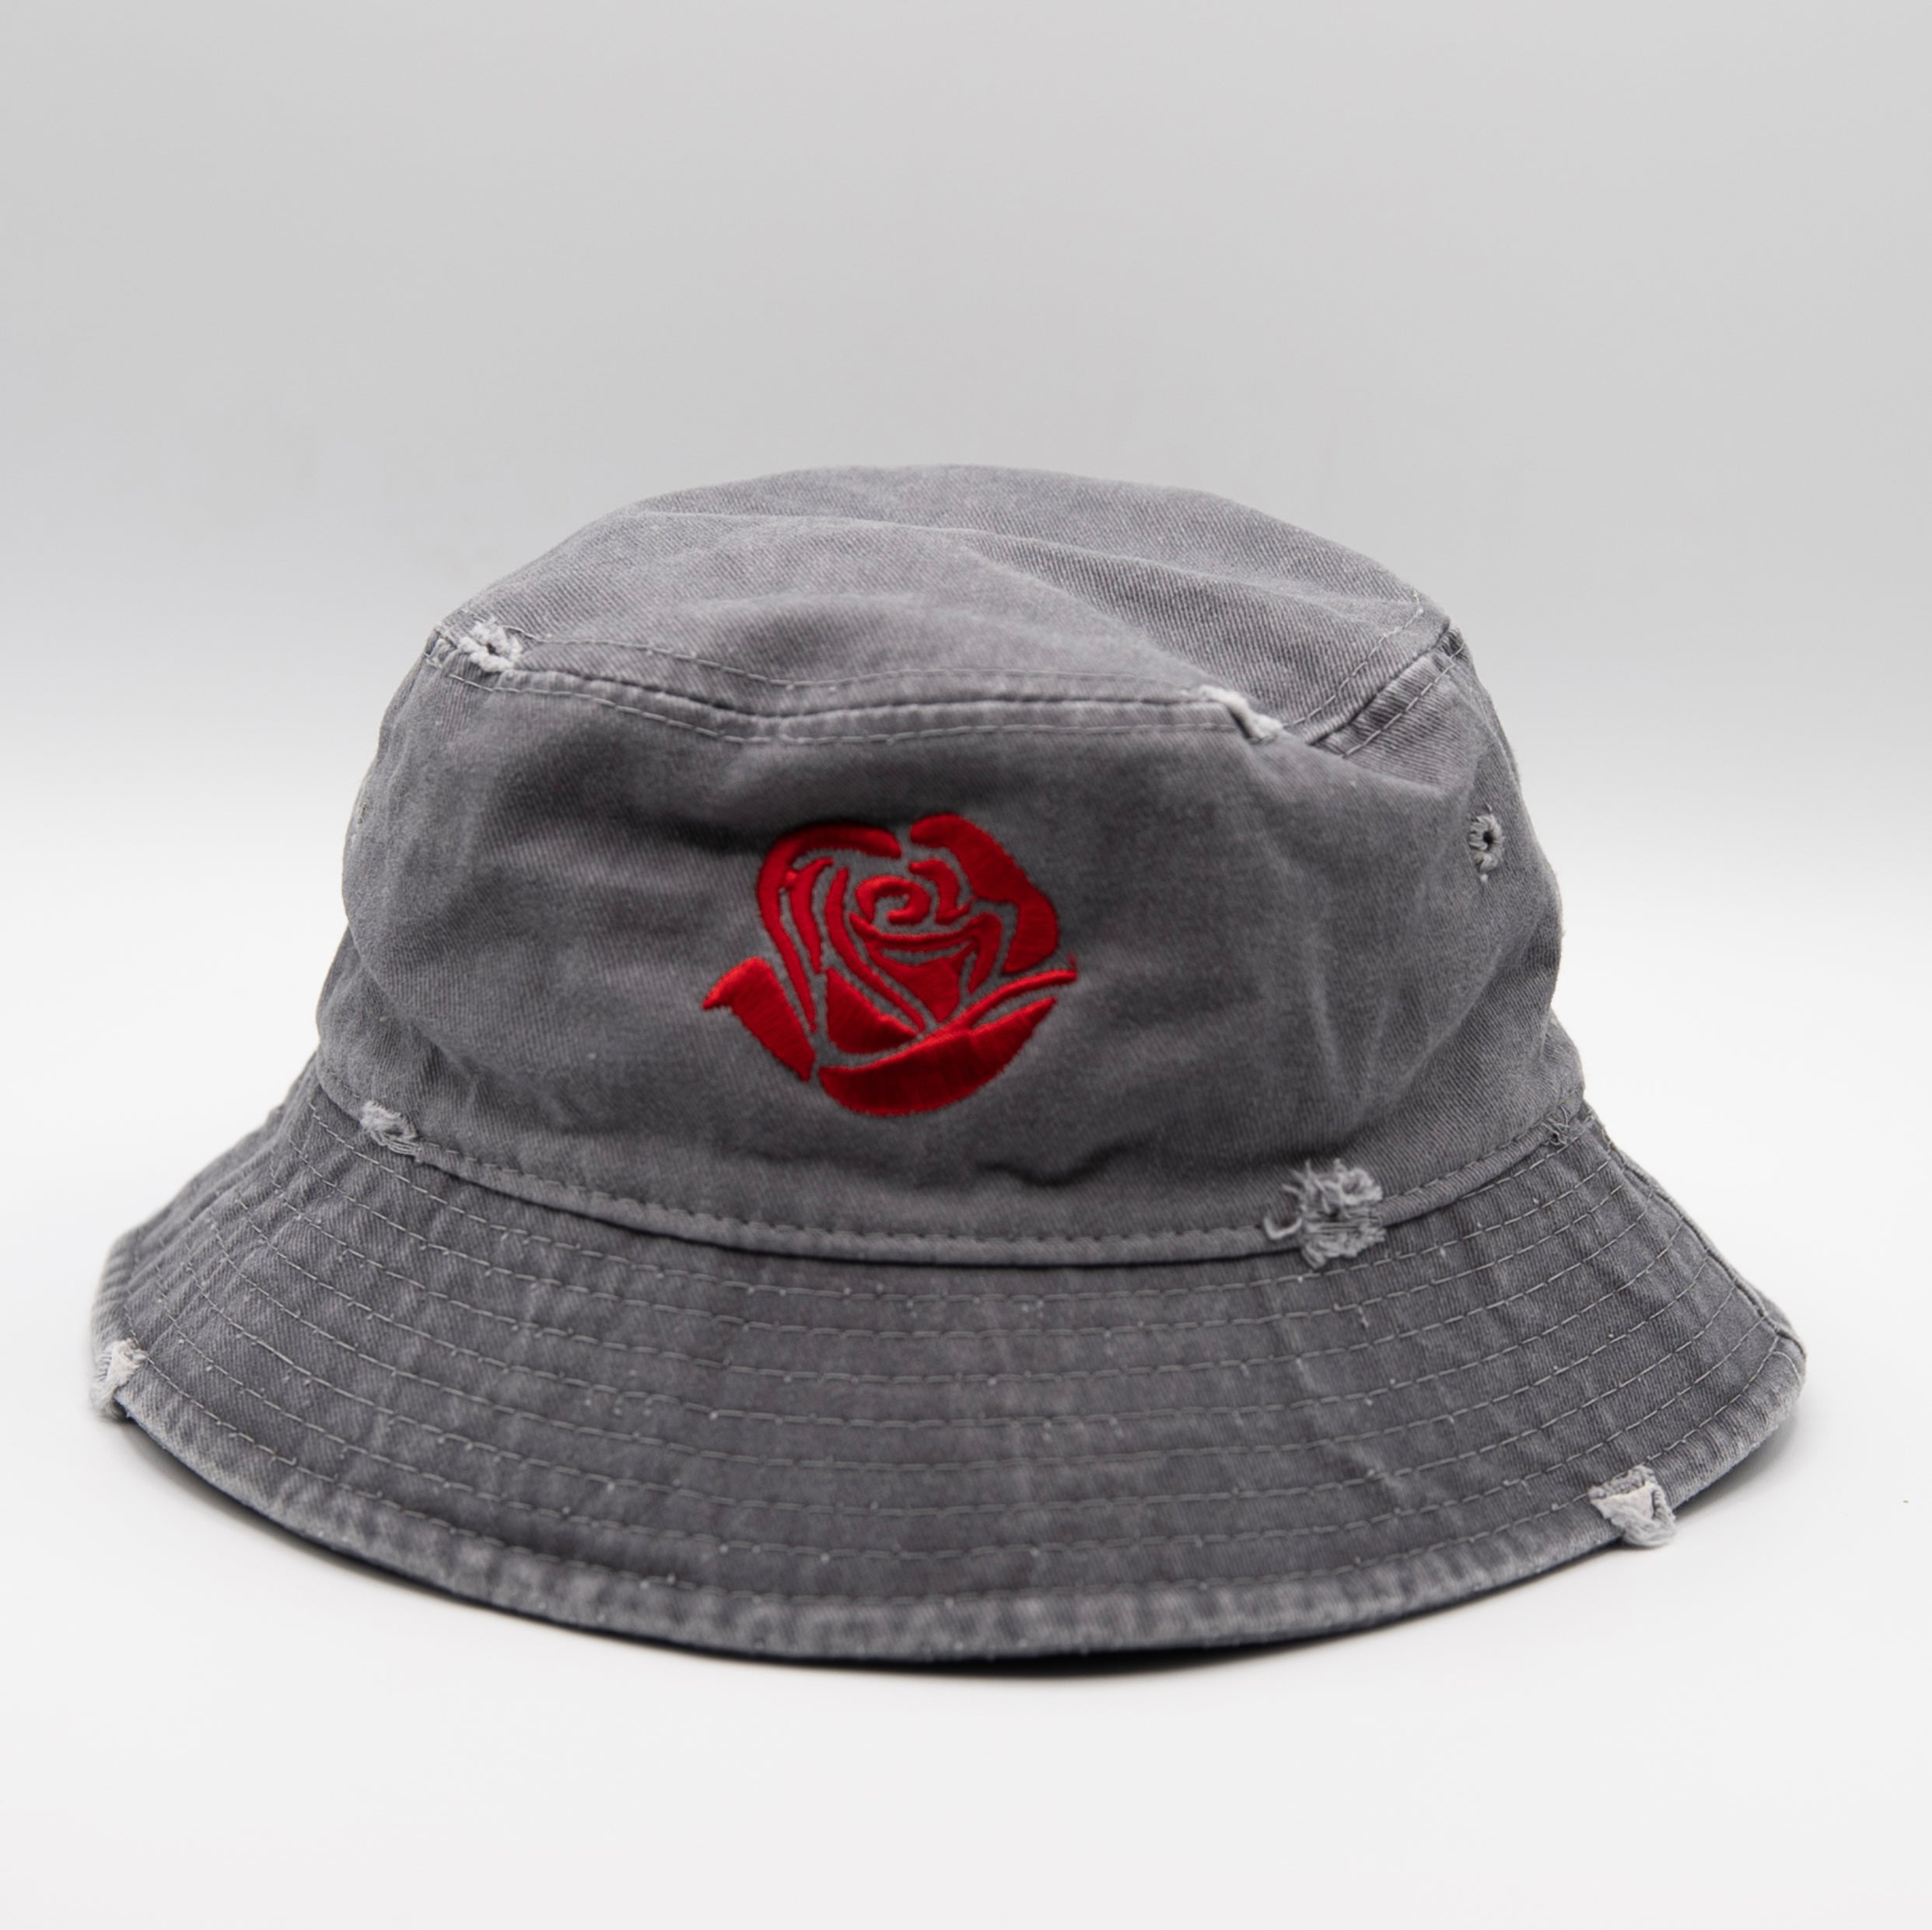 Distressed Denim “Parlay” Bucket Hat (Limited Edition)